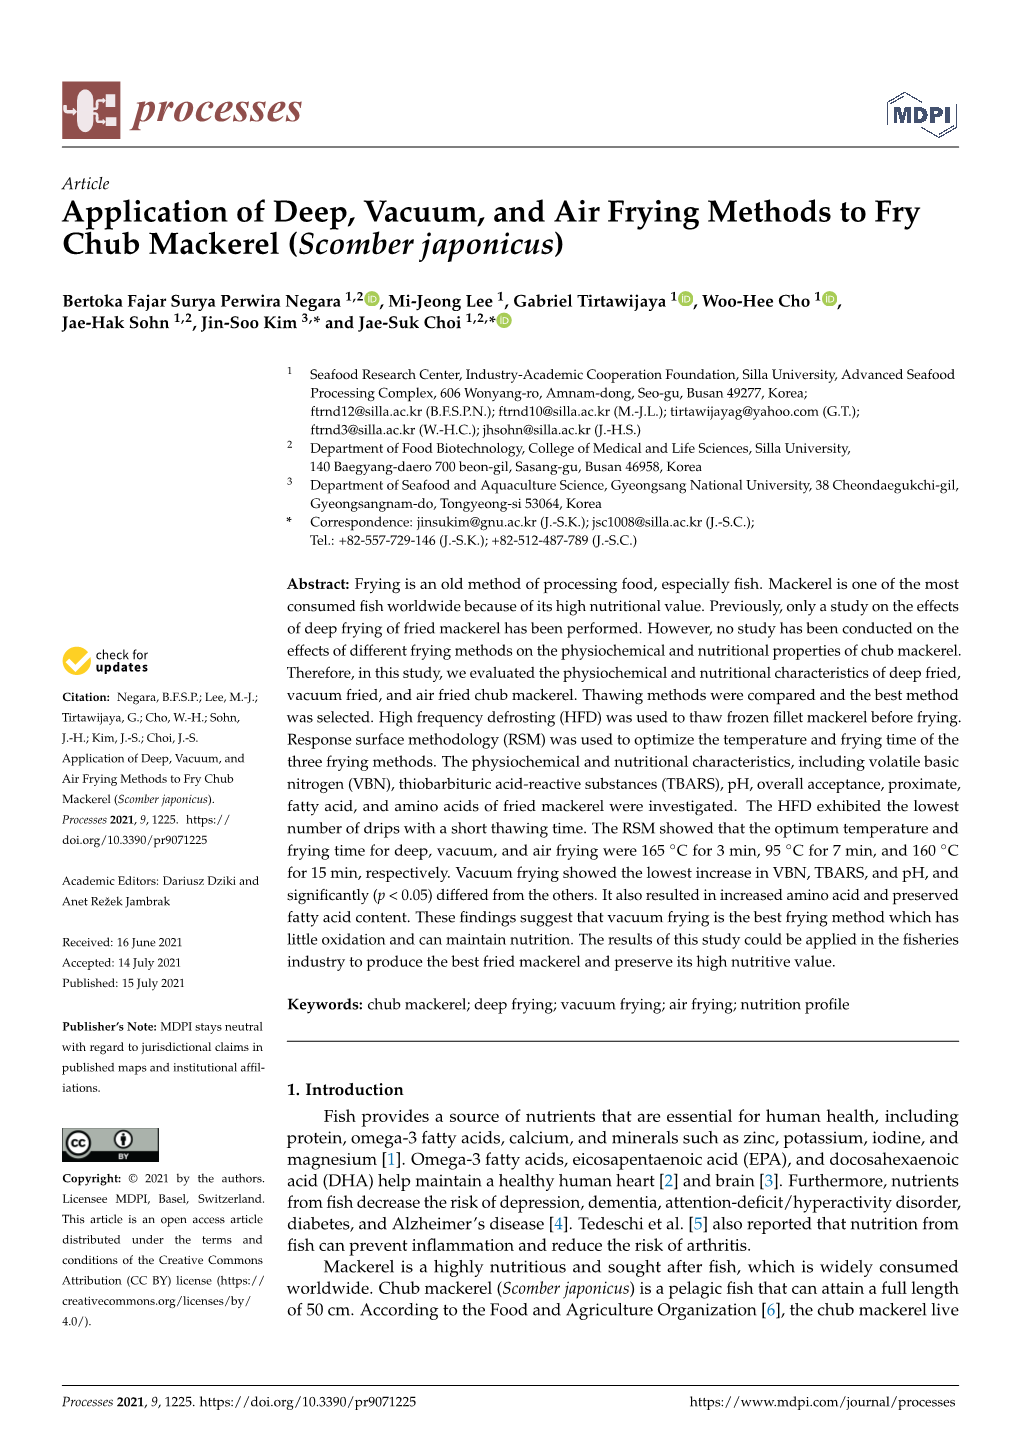 Application of Deep, Vacuum, and Air Frying Methods to Fry Chub Mackerel (Scomber Japonicus)